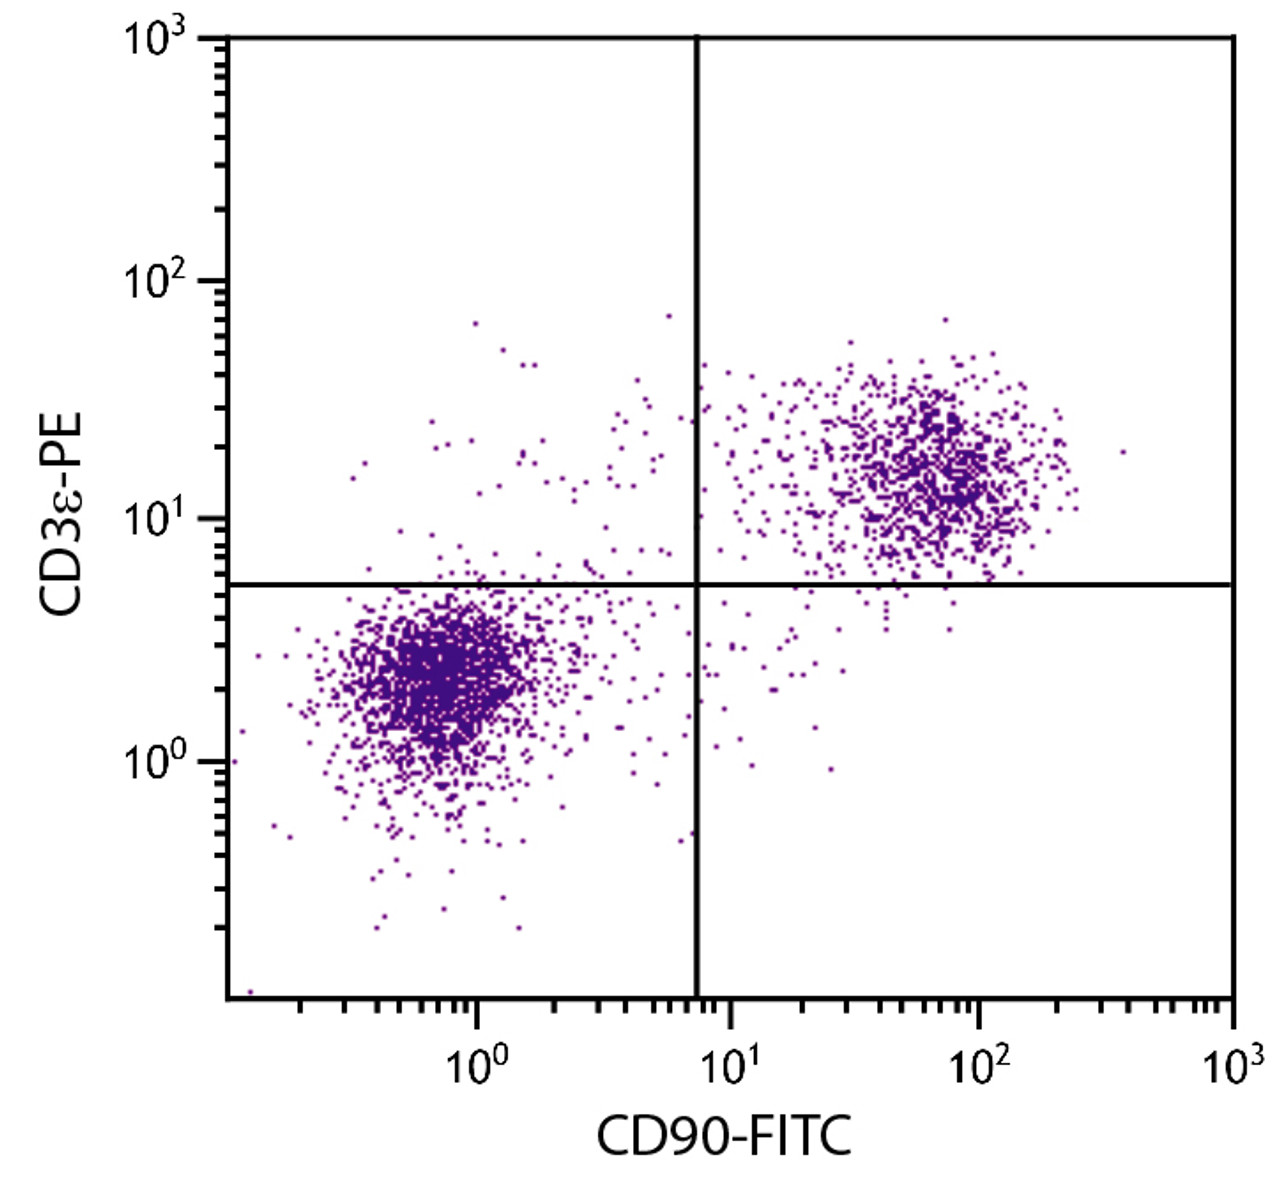 BALB/c mouse splenocytes were stained with Rat Anti-Mouse CD90-FITC (Cat. No. 98-861) and Rat Anti-Mouse CD3?-PE .